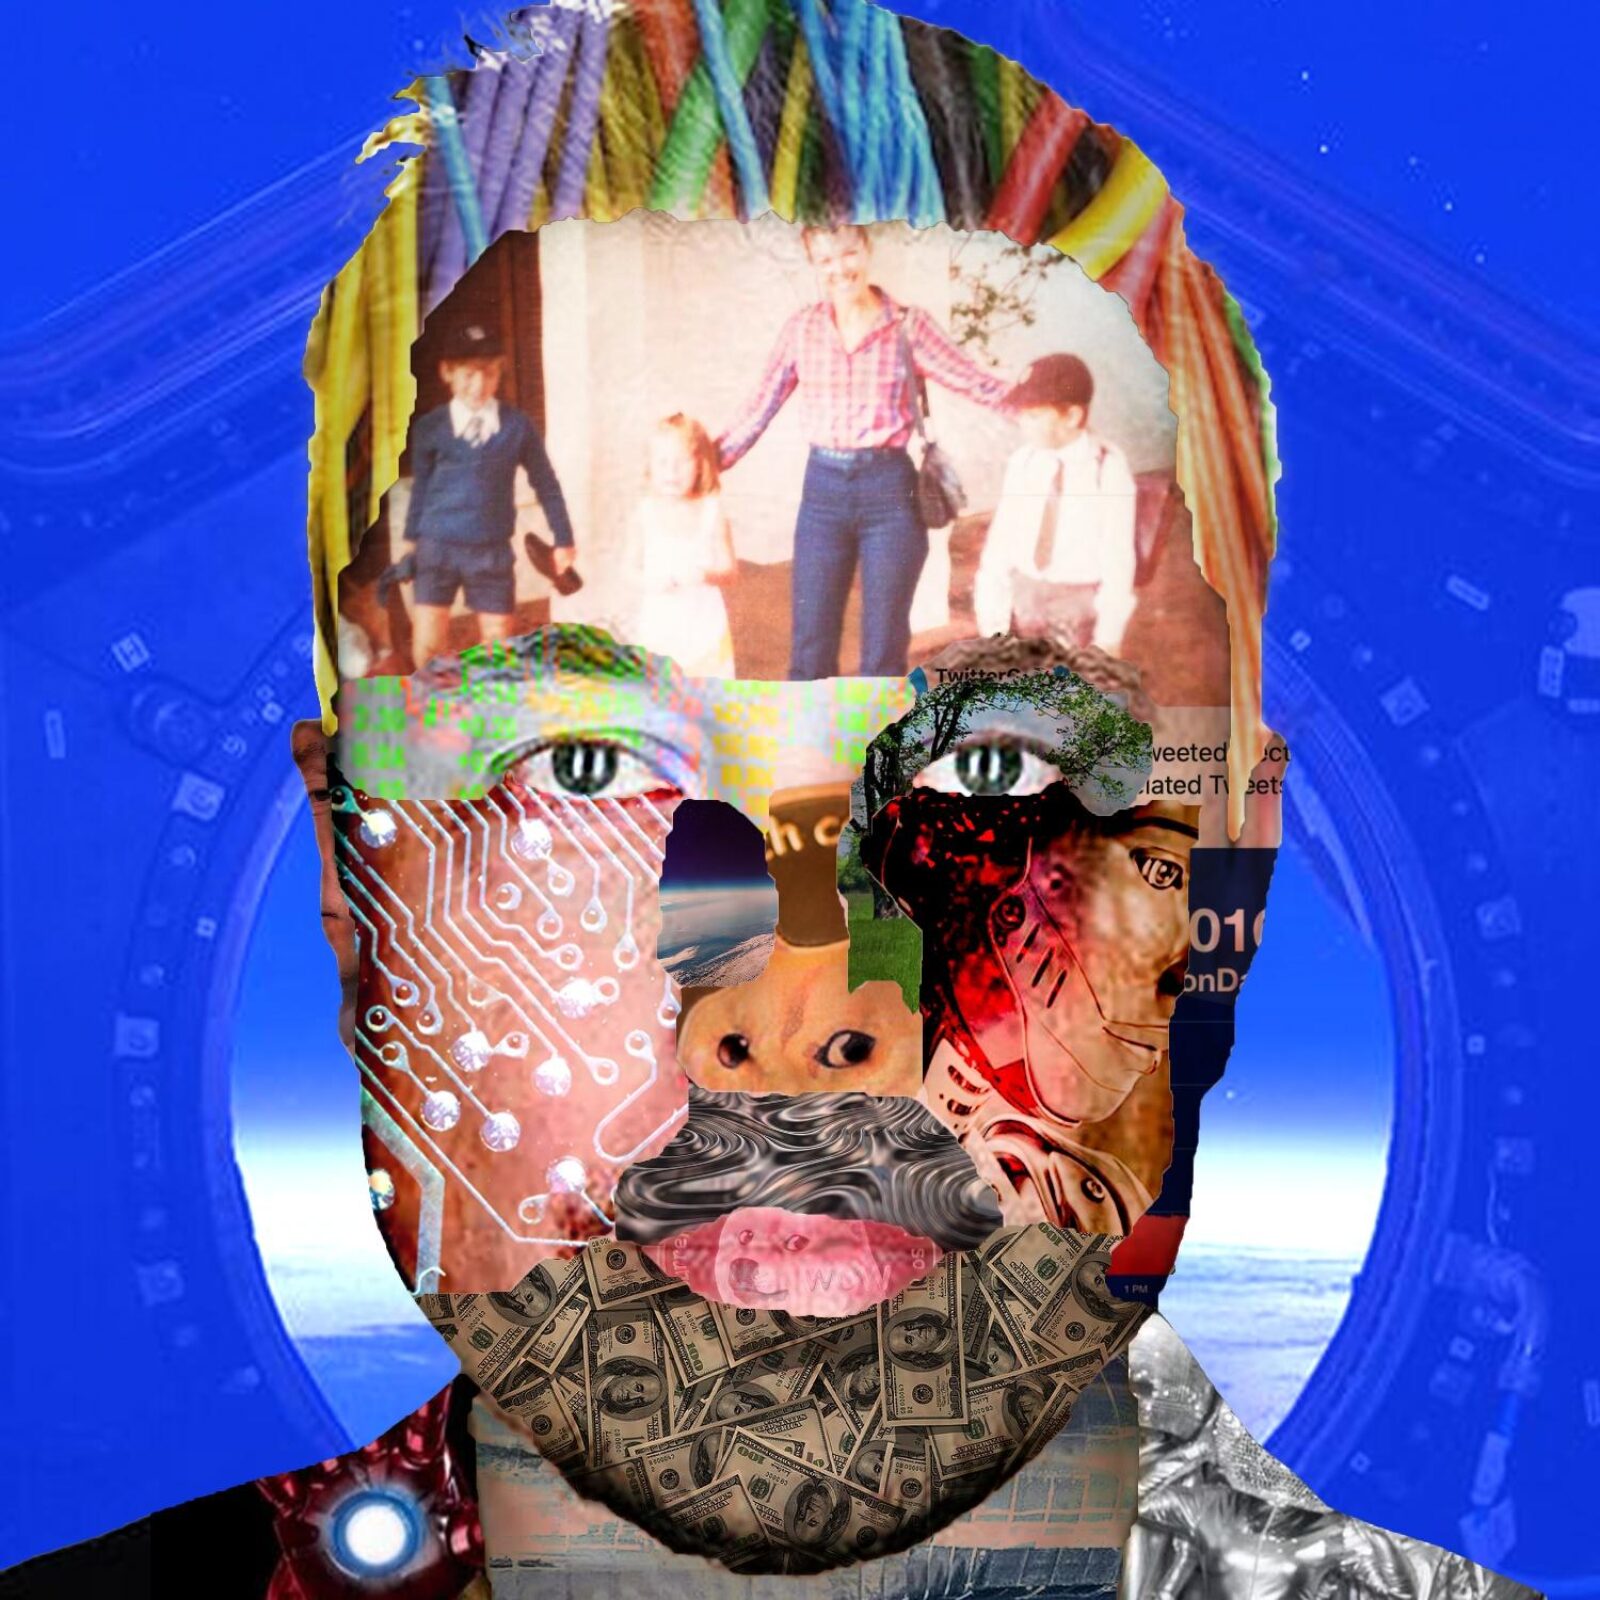 self-portrait of face divided into sections with colorful hair